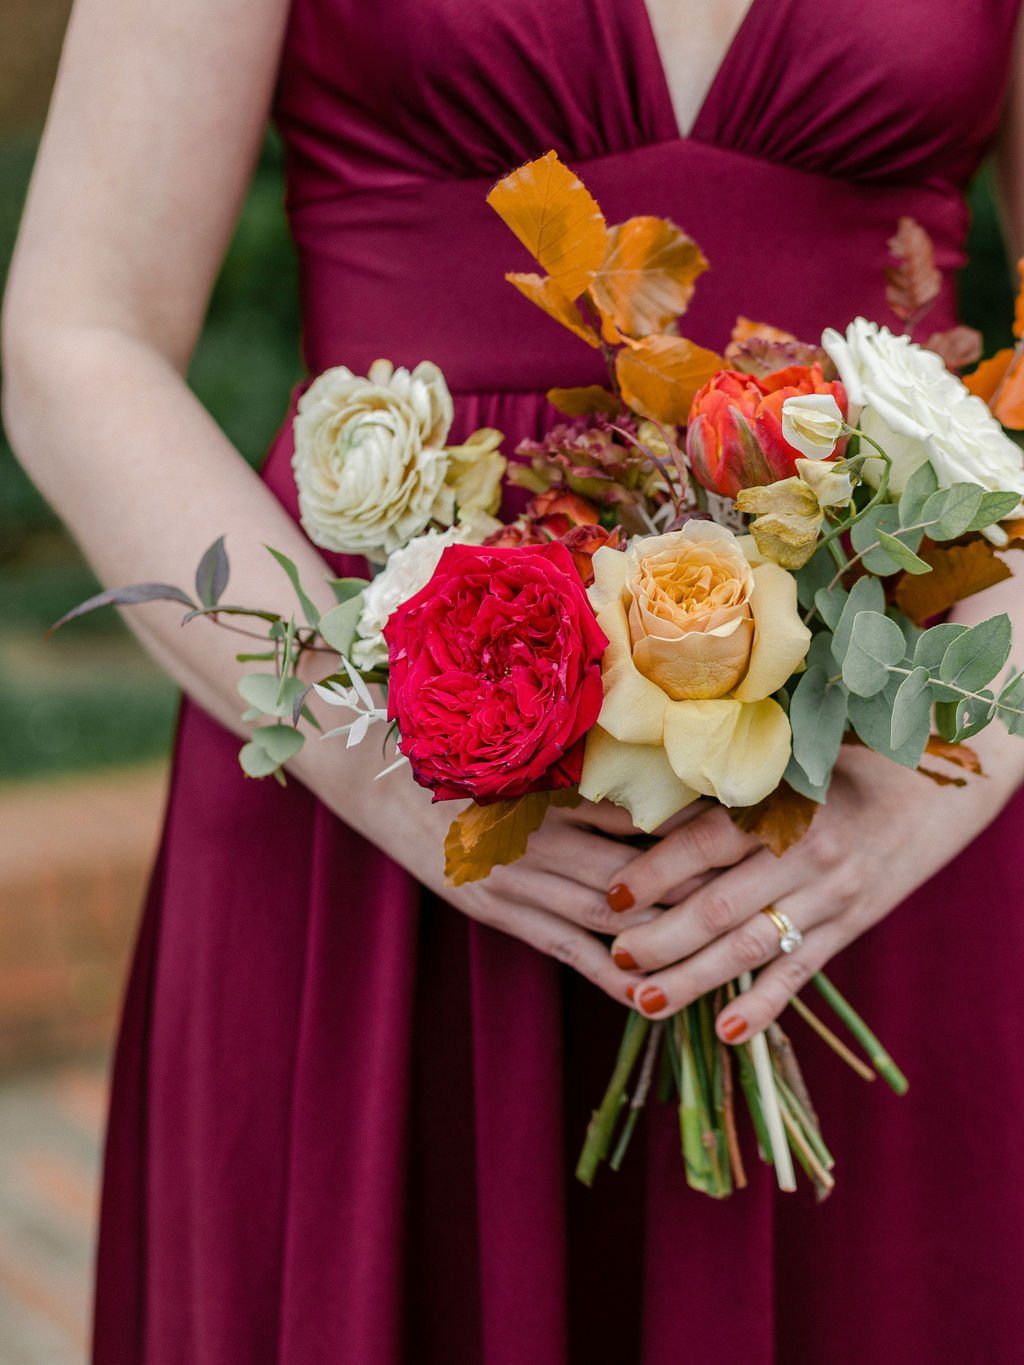 Whimsical bridal party florals featuring vibrant reds, terra cotta, dusty rose, cream, and sage green florals. Fall arrangements highlighted by garden roses, tulips, fall branches, dried hydrangea, and eucalyptus.  Floral design by Rosemary and Finch